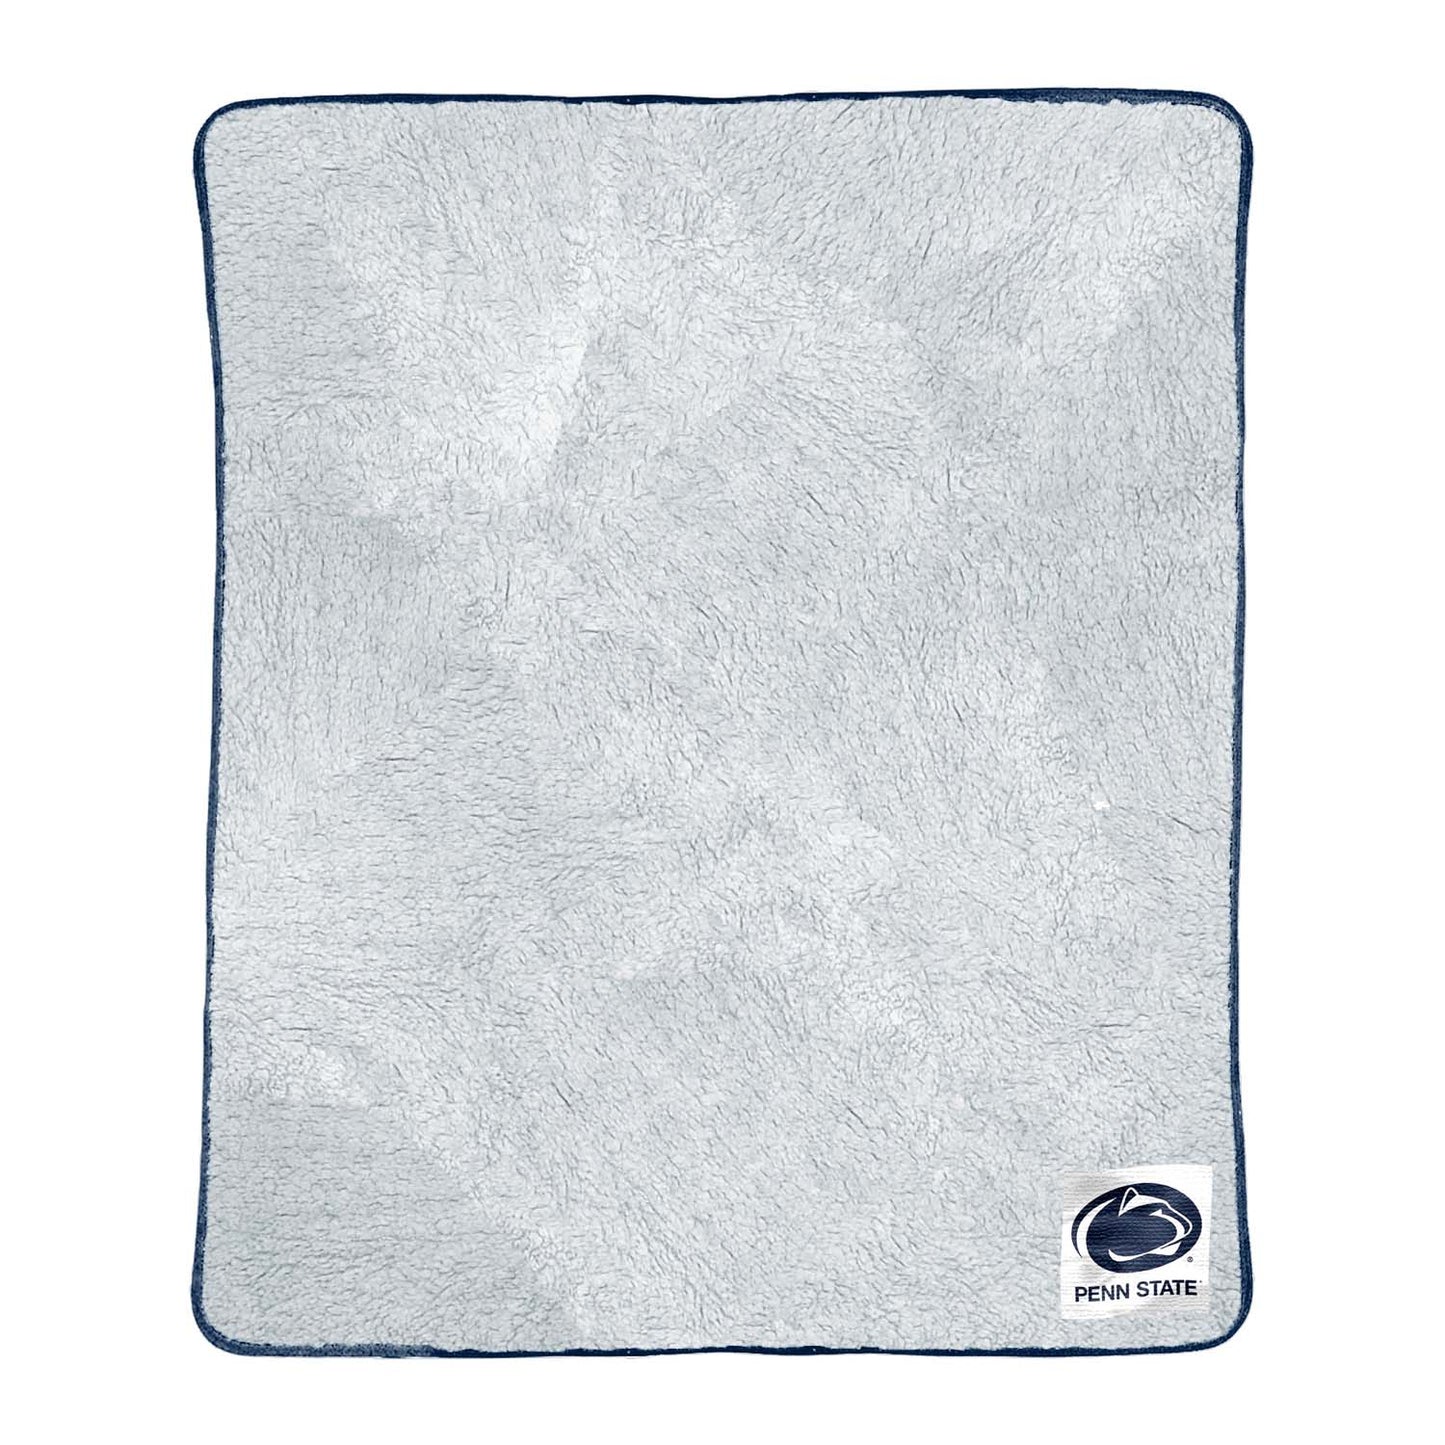 Penn State Nittany Lions NCAA Silk Sherpa College Throw Blanket - Navy